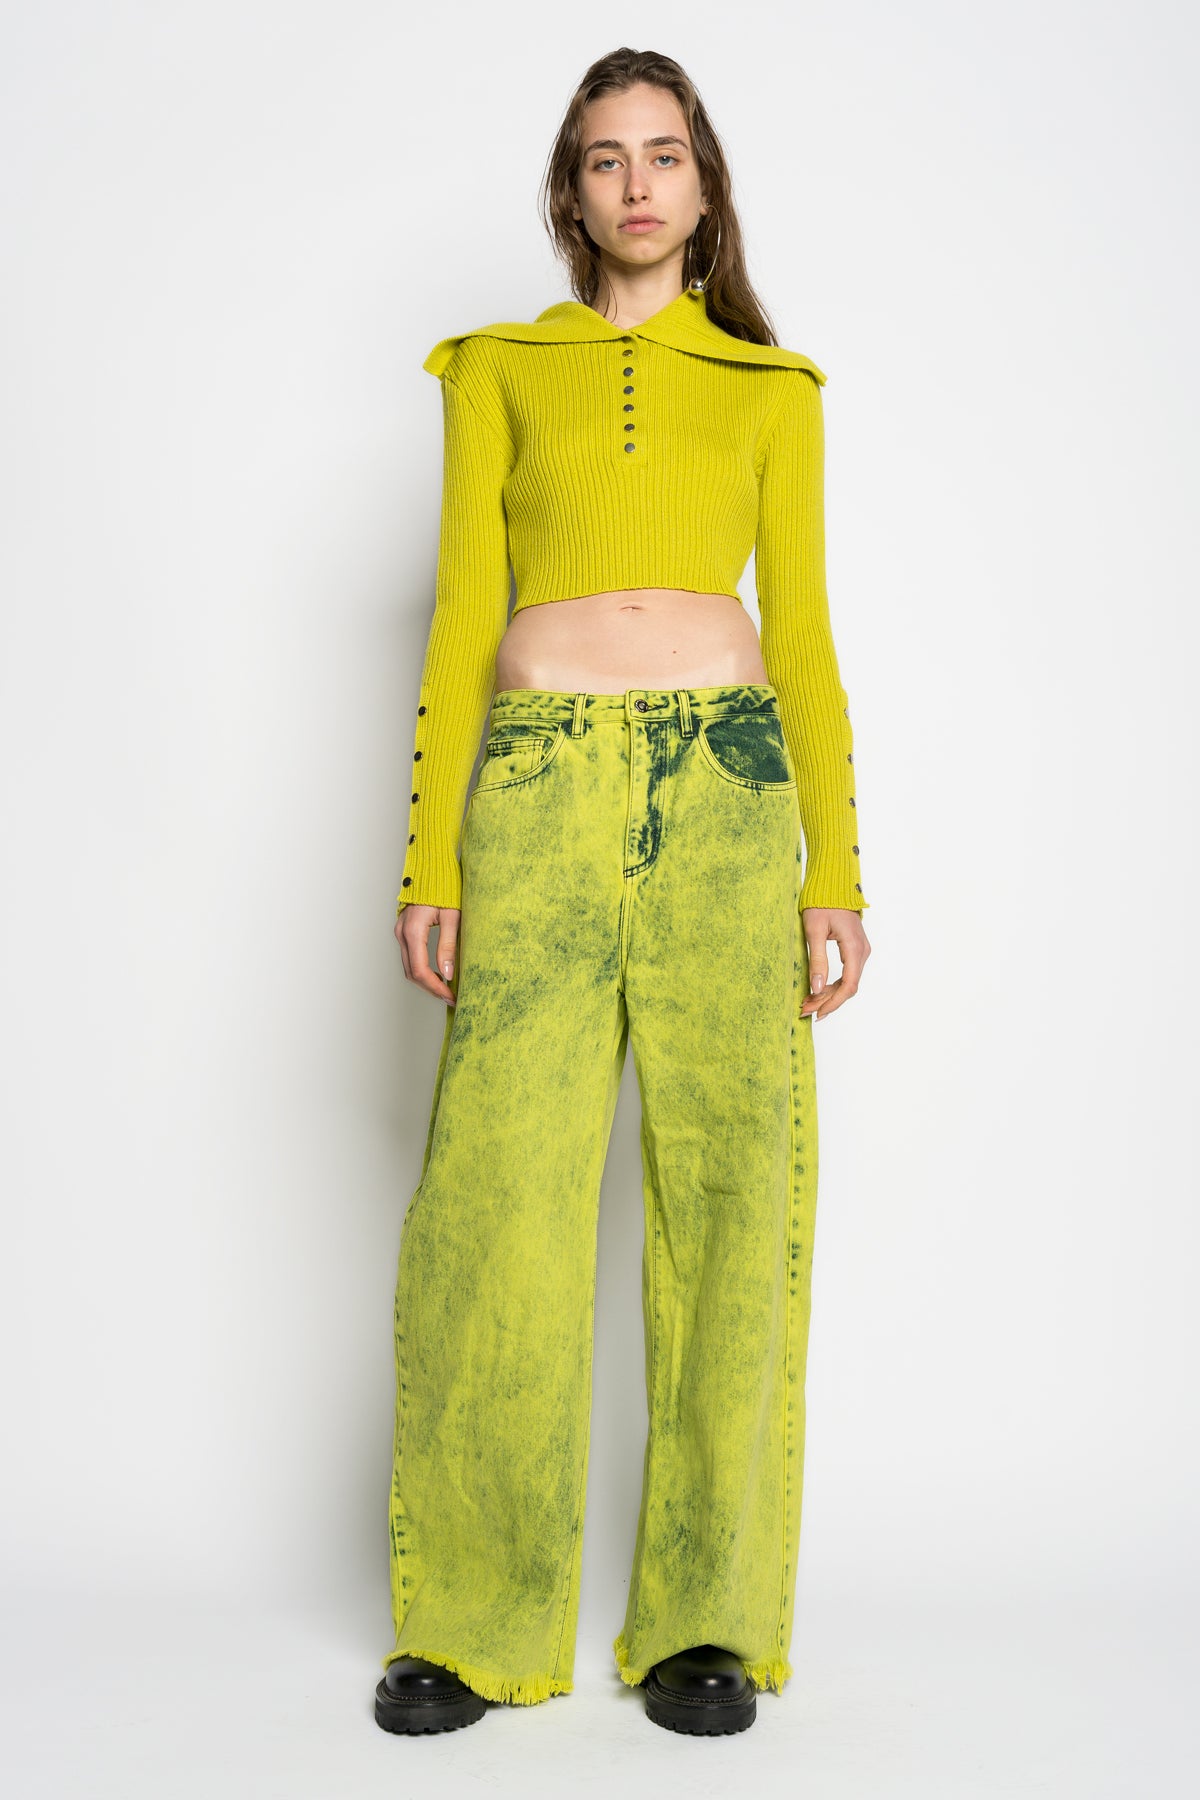 LIME MERINO WOOL KNITTED CROPPED TOP WITH BIG COLLAR marques almeida